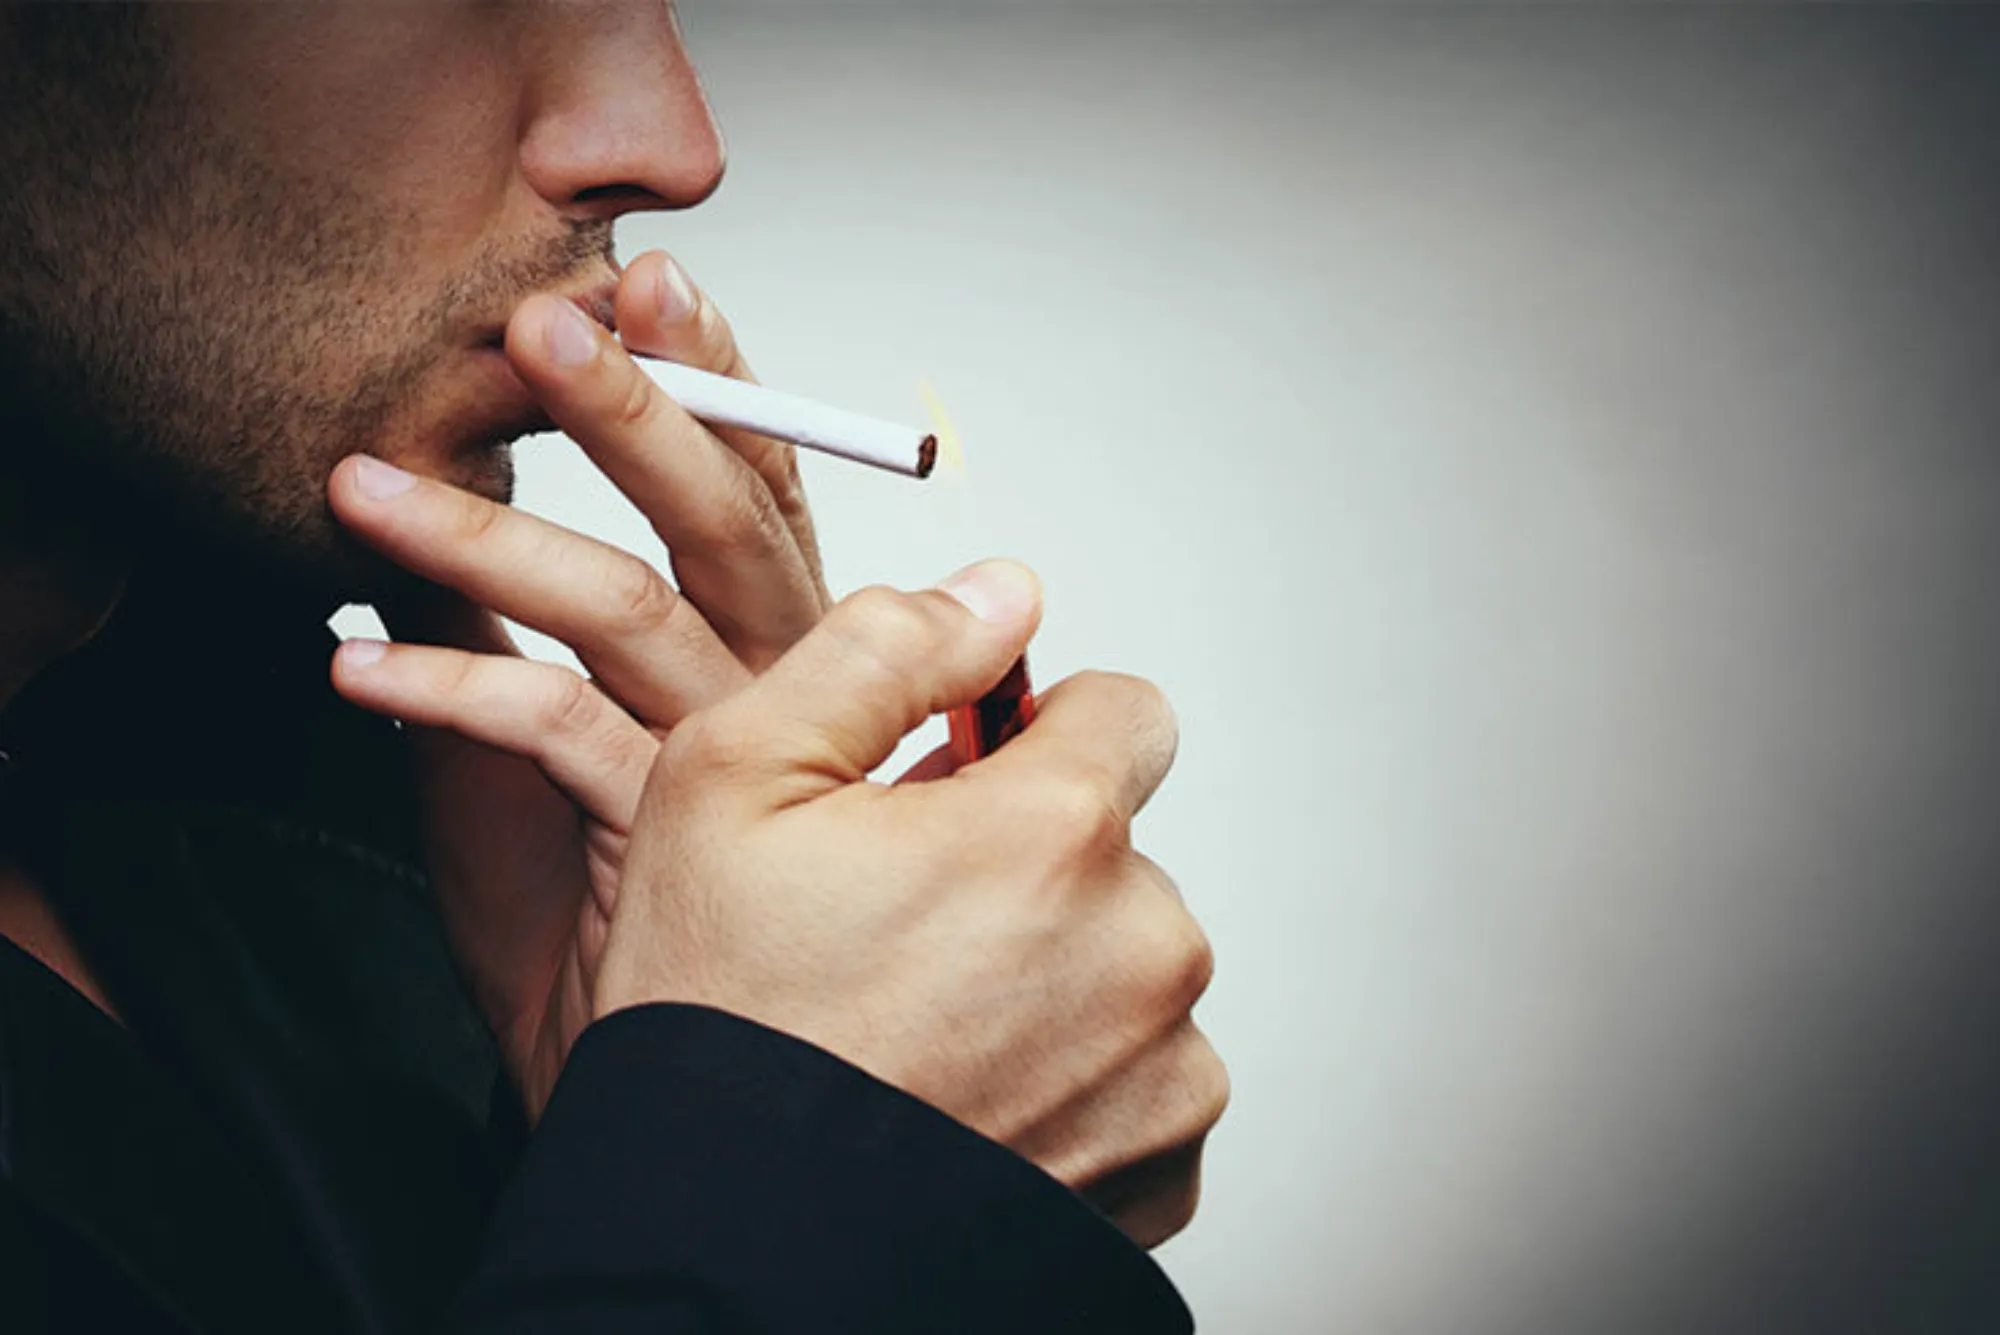 Does Smoking Affect GYM Gains